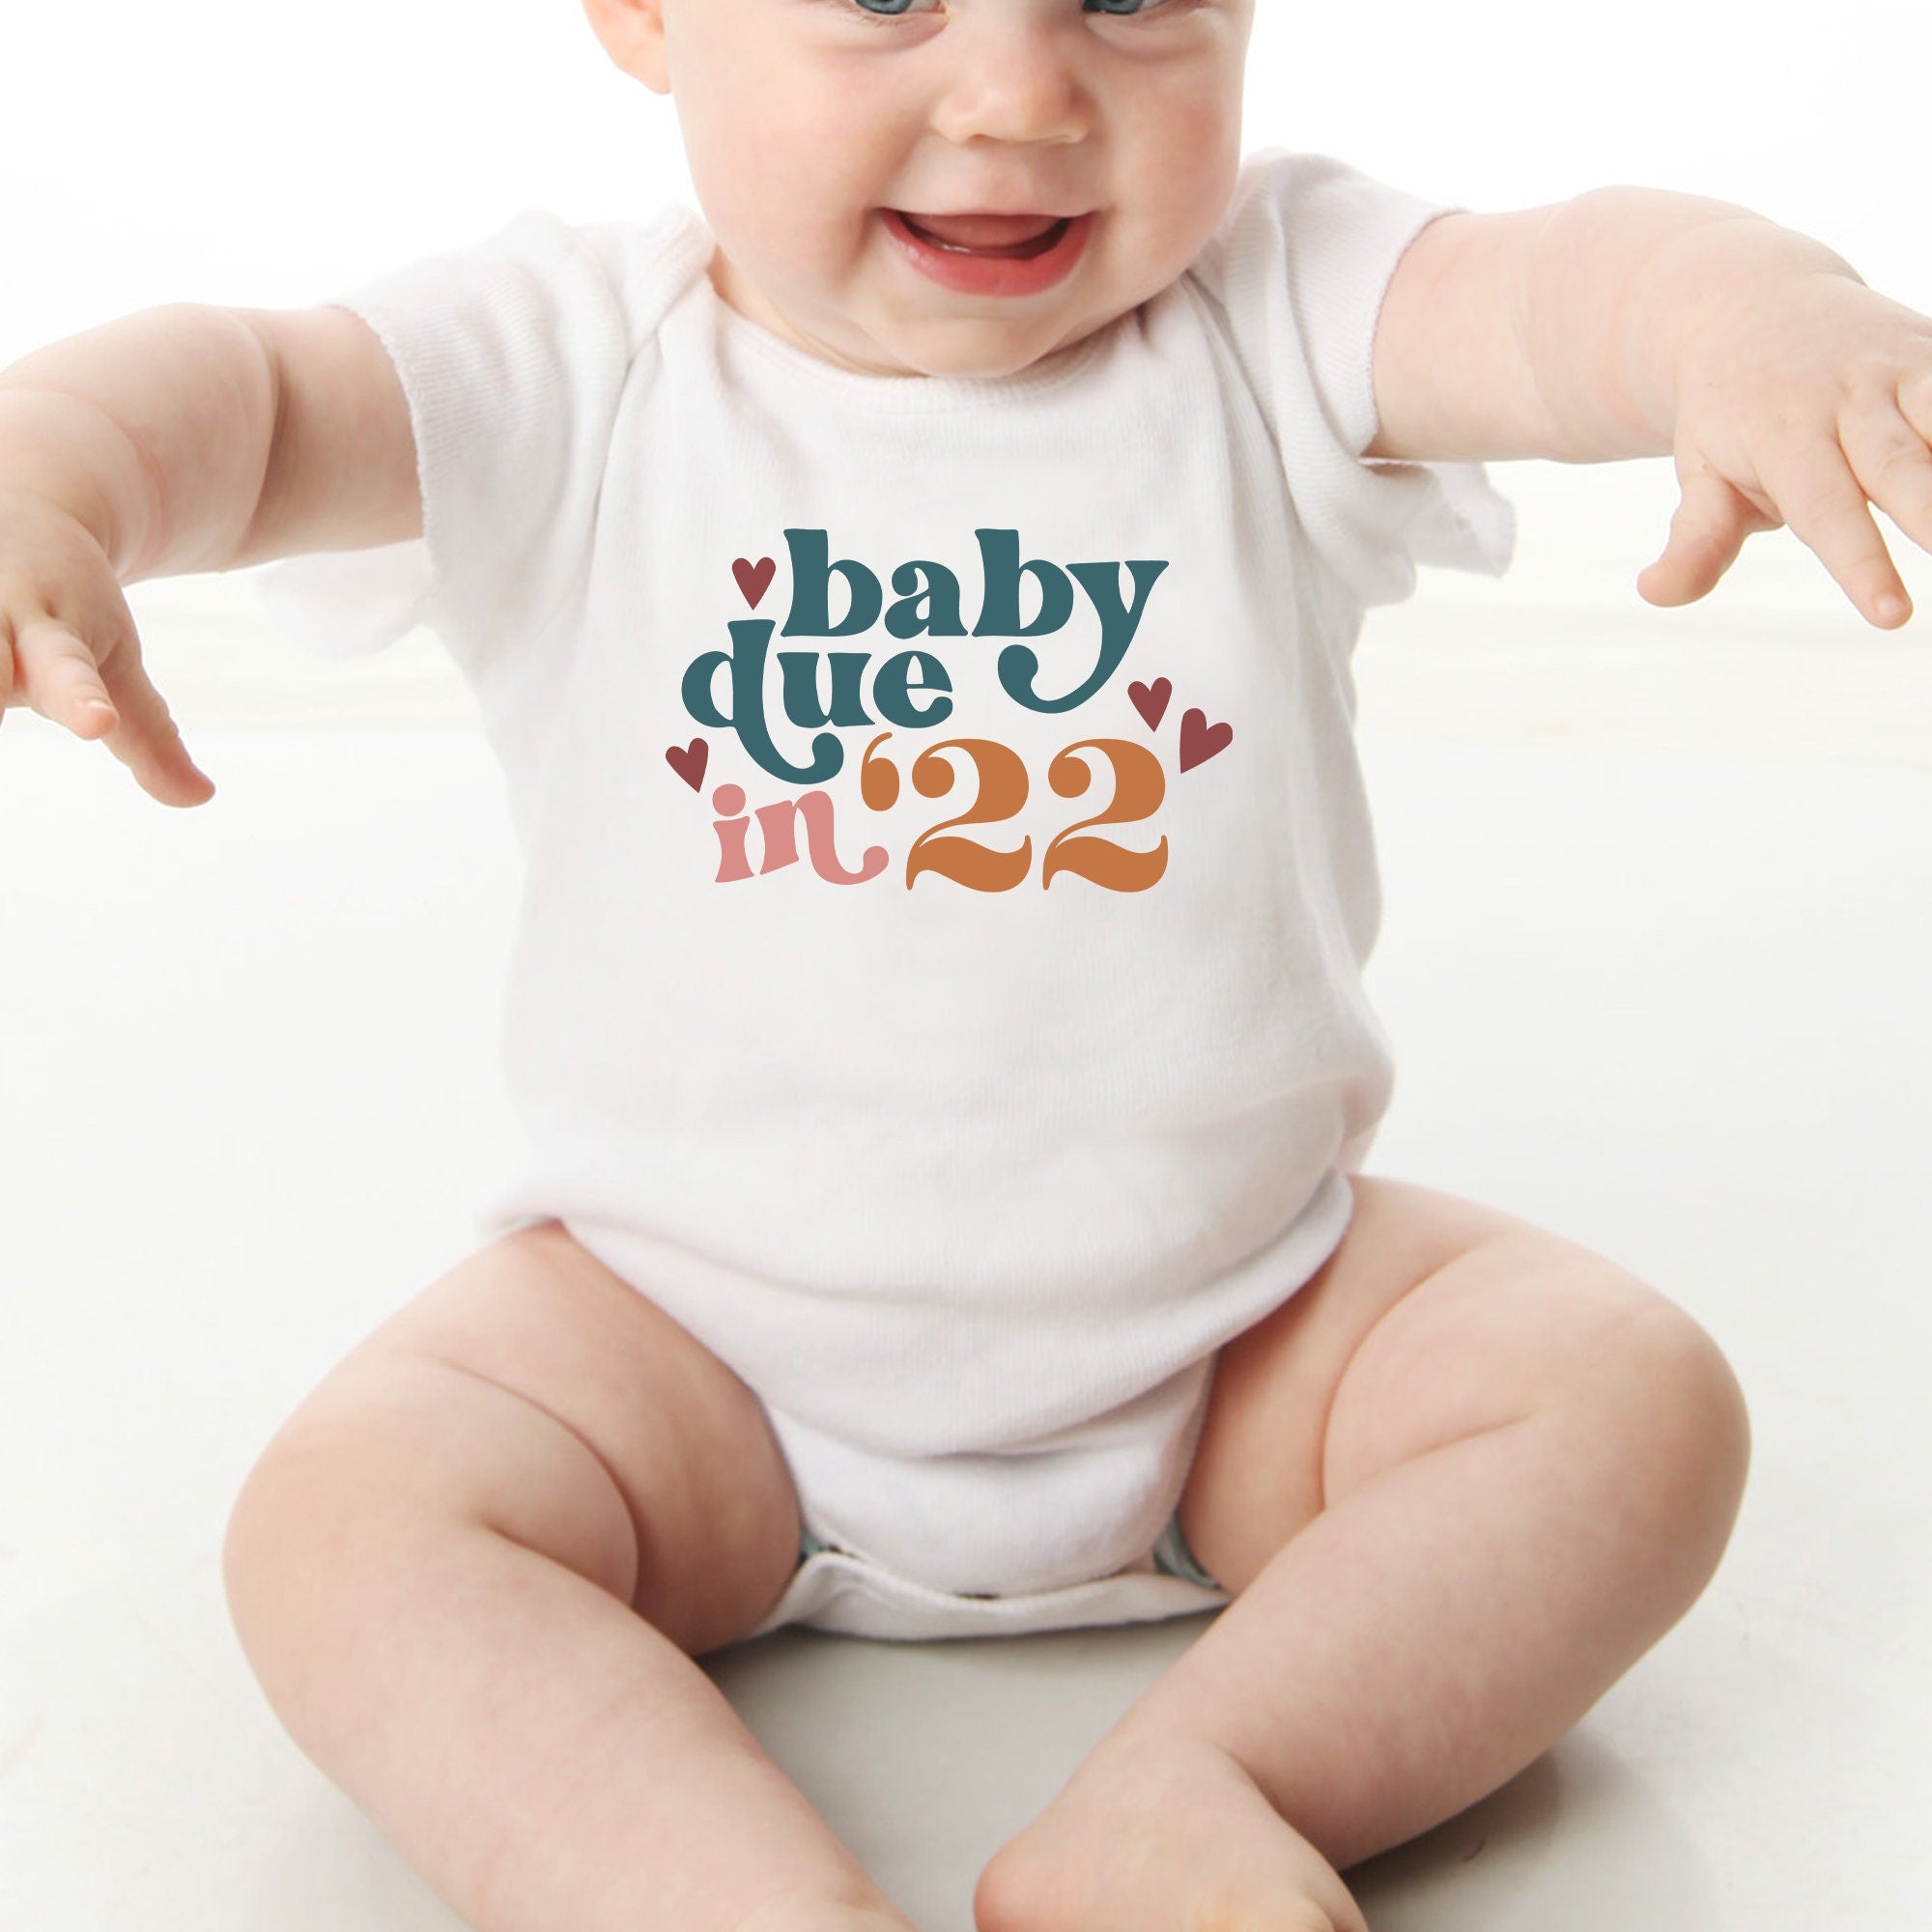 Baby Due in 2022 | Baby Announcement Shirt | Baby Reveal Bodysuit | Baby Shower Gift | Pregnancy Annoucement Shirt